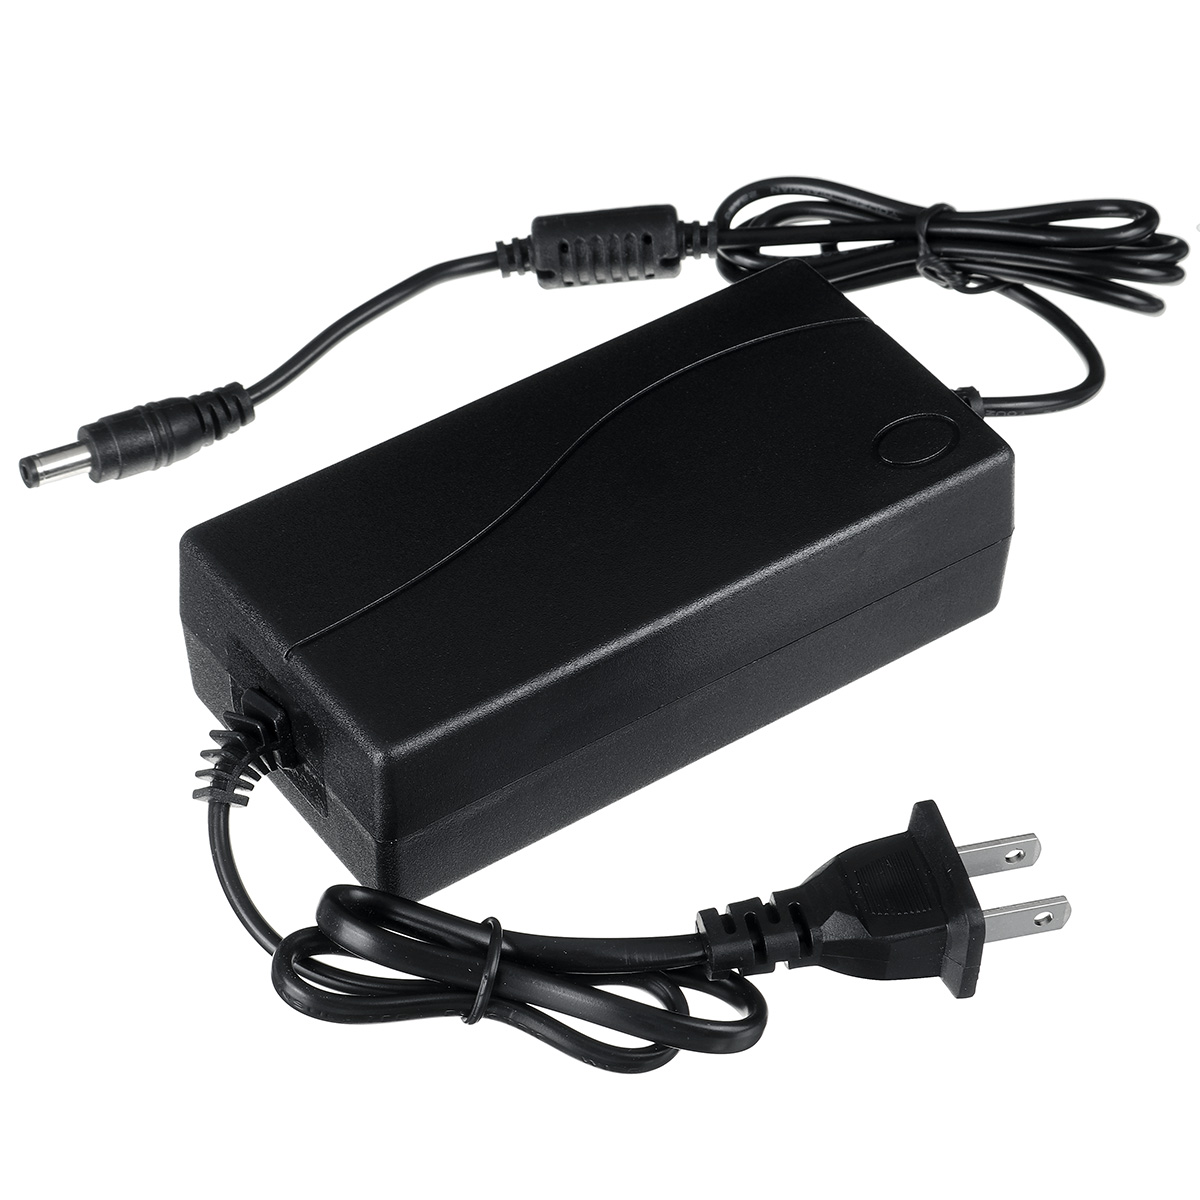 100-240V-6A-Power-Cord-Adapter-50--60HZ-Power-Cable-Adapter-Laptop-Charger-1790400-3